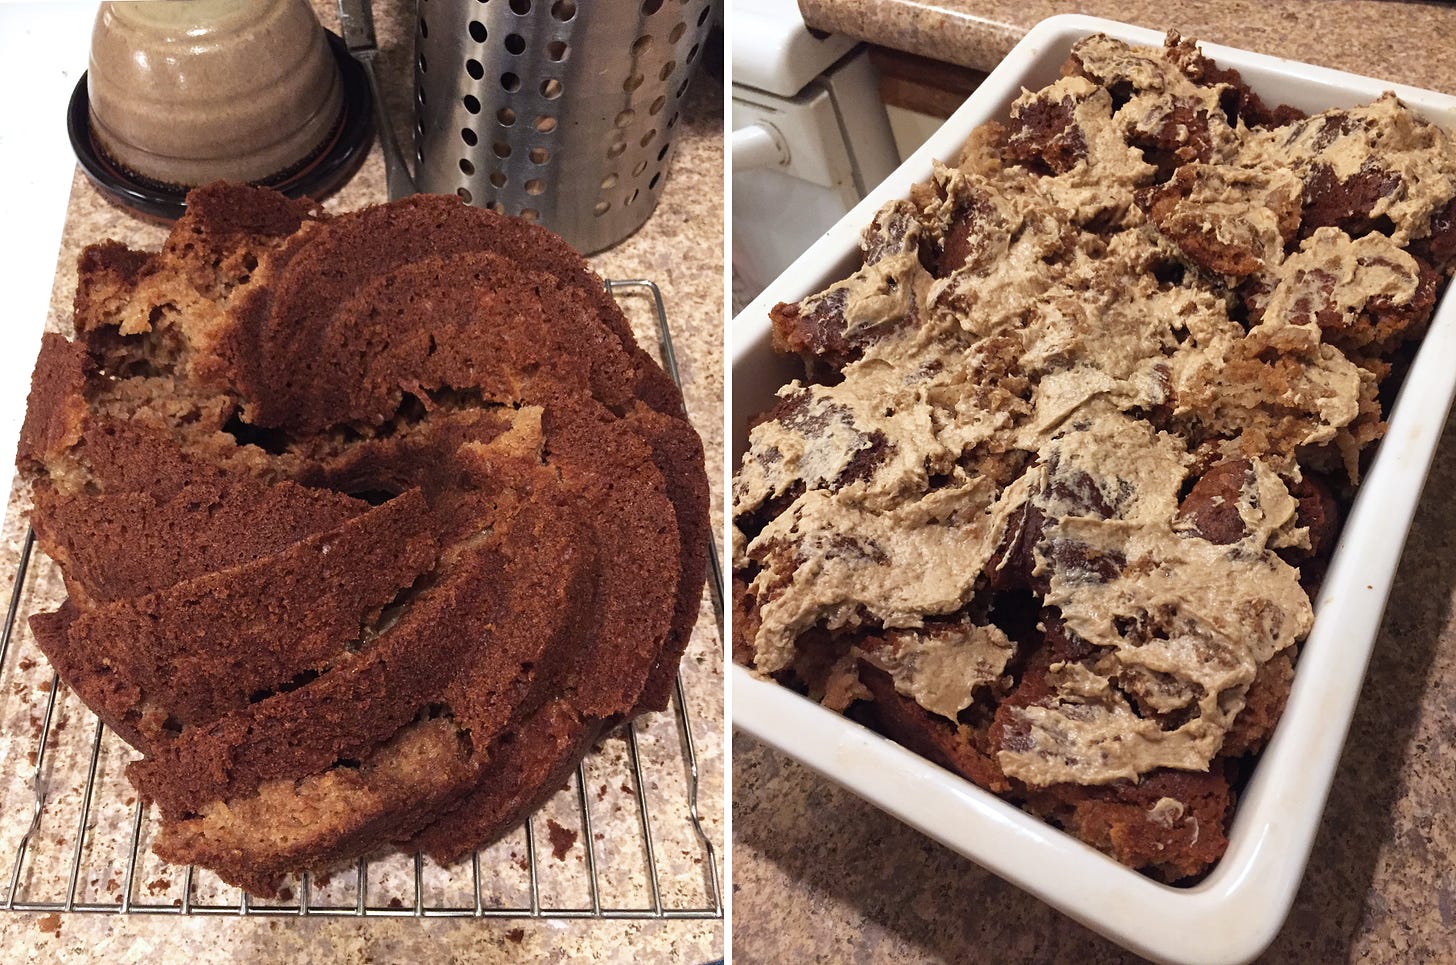 left image: on a cooling rack, a bundt cake that has broken apart in at least three places. Right image: a white baking dish with smaller cake chunks in it, covered in smears of brown sugar buttercream.